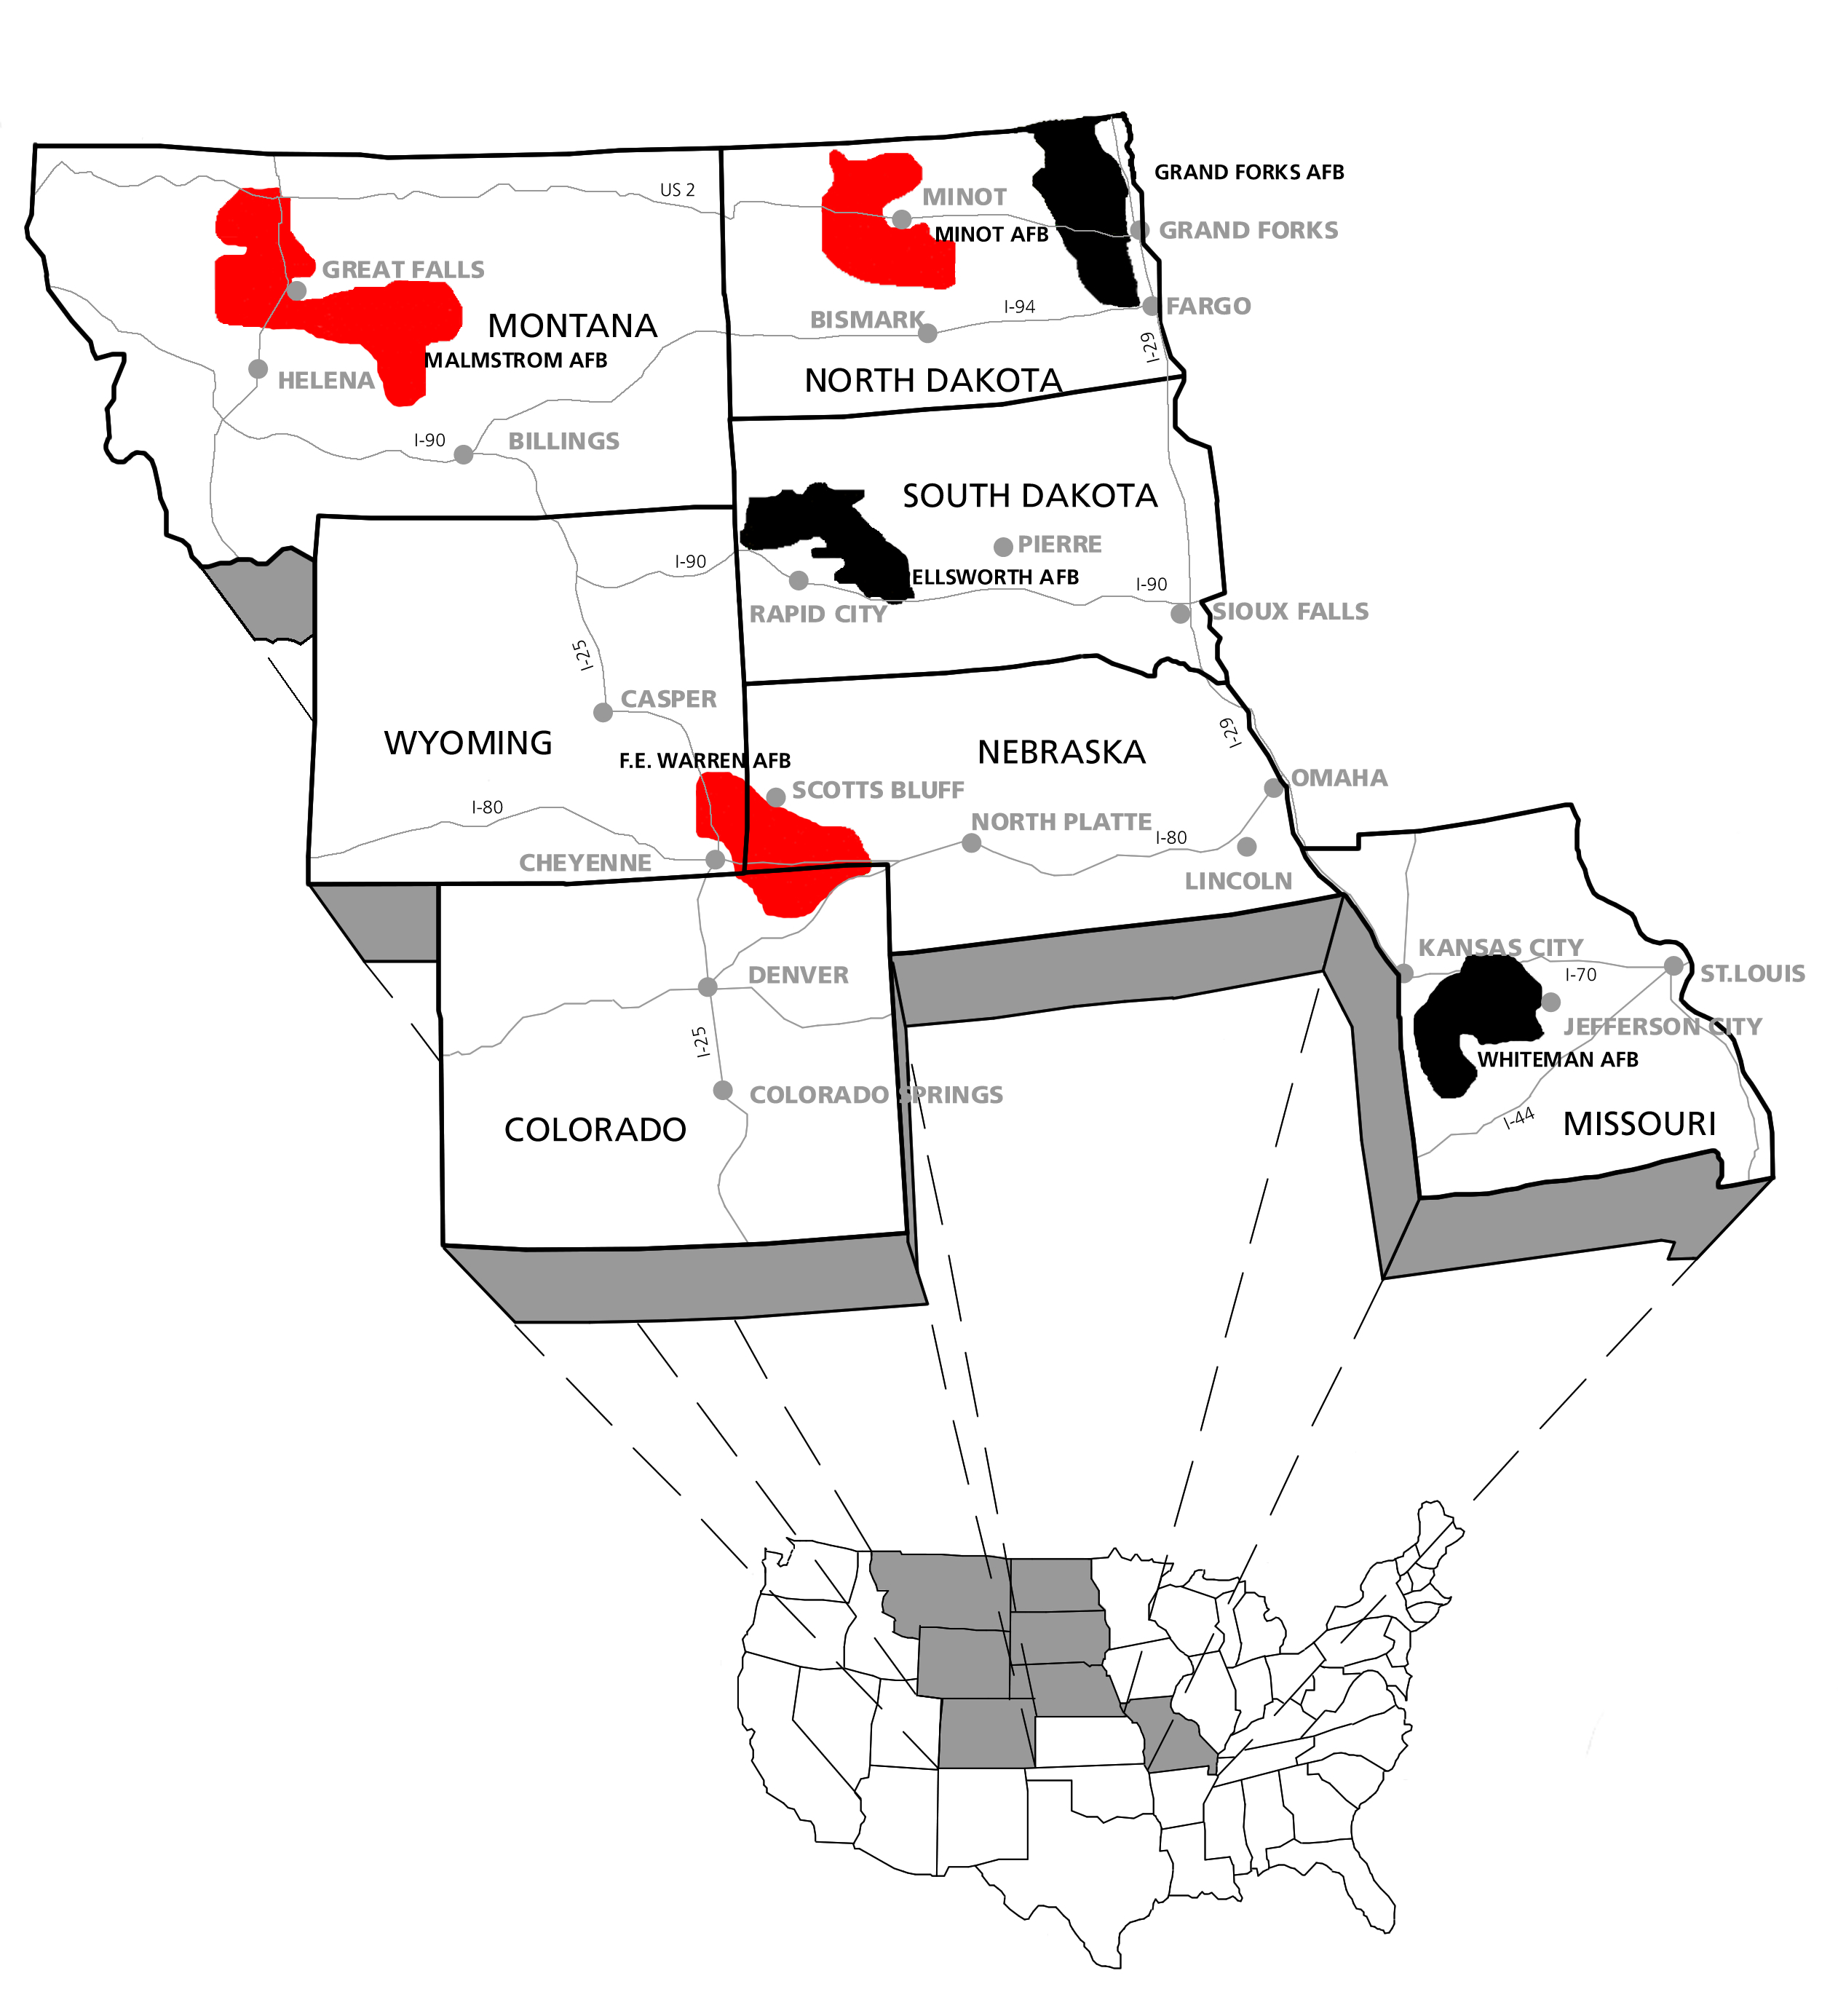 National Park Service map of active (red) and inactive (grey) Minuteman ICBM missile fields on the Great Plains.